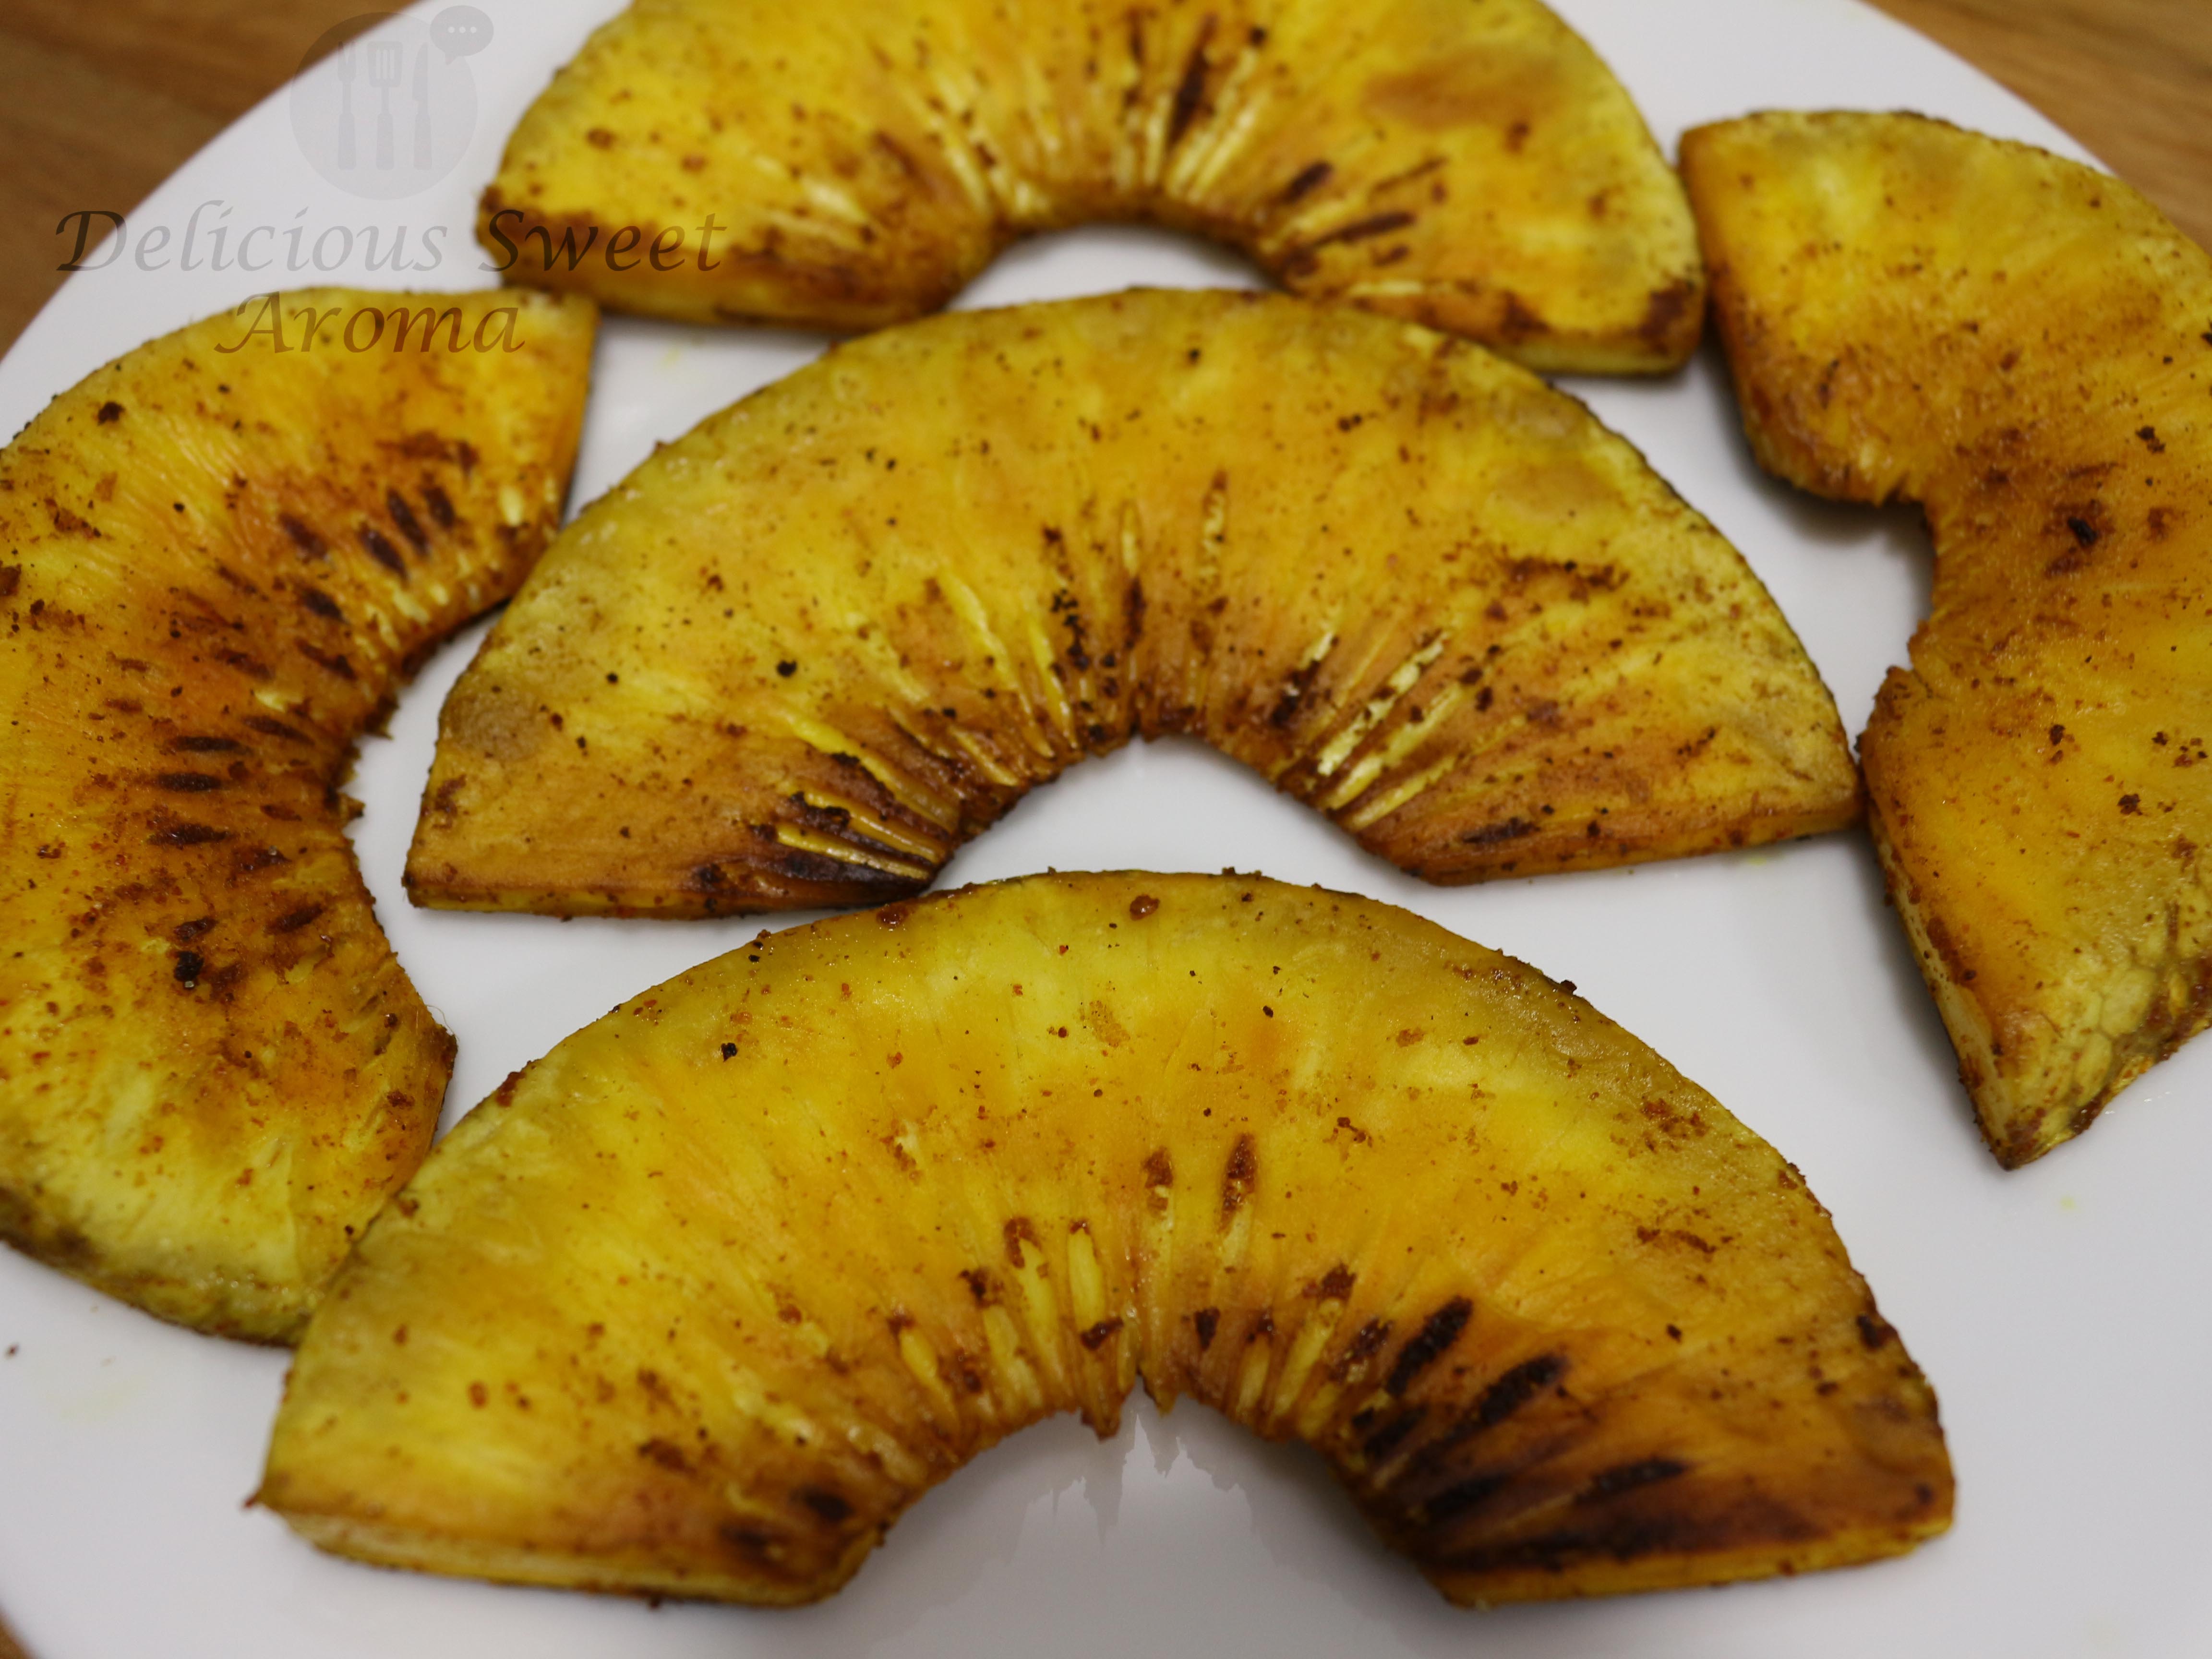 Breadfruit chili fry | Delicious Sweet Aroma | Indian